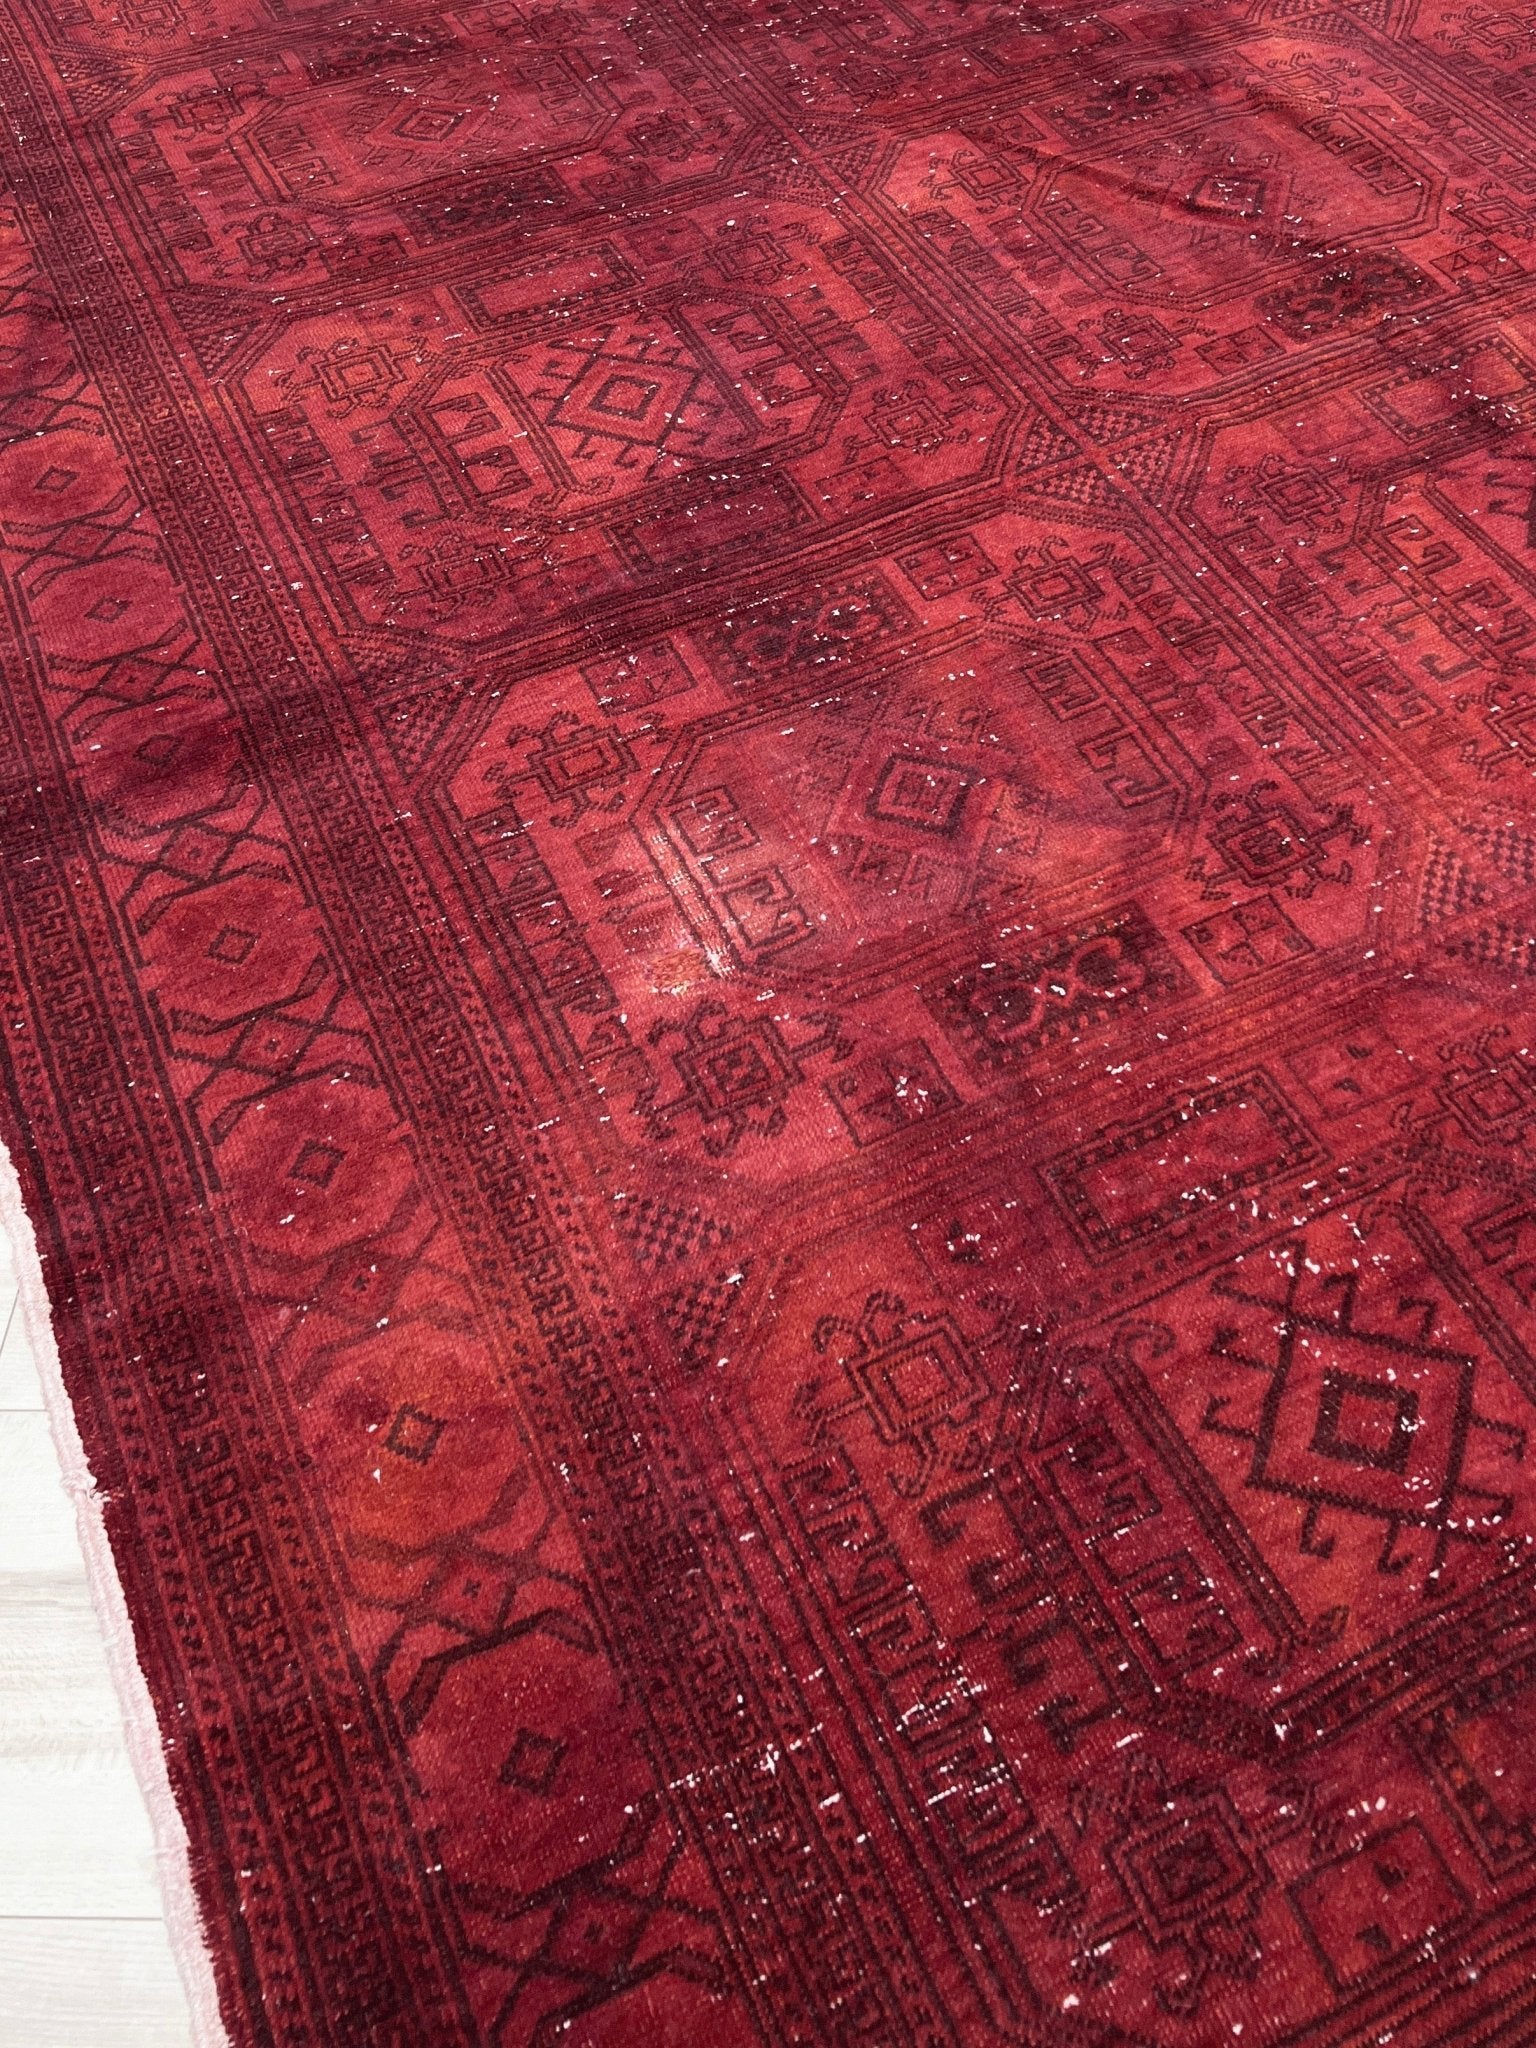 Large red overdyed handmade wool turkish rug San Francisco Bay Area. Buy rugs online free shipping to USA and Canada.